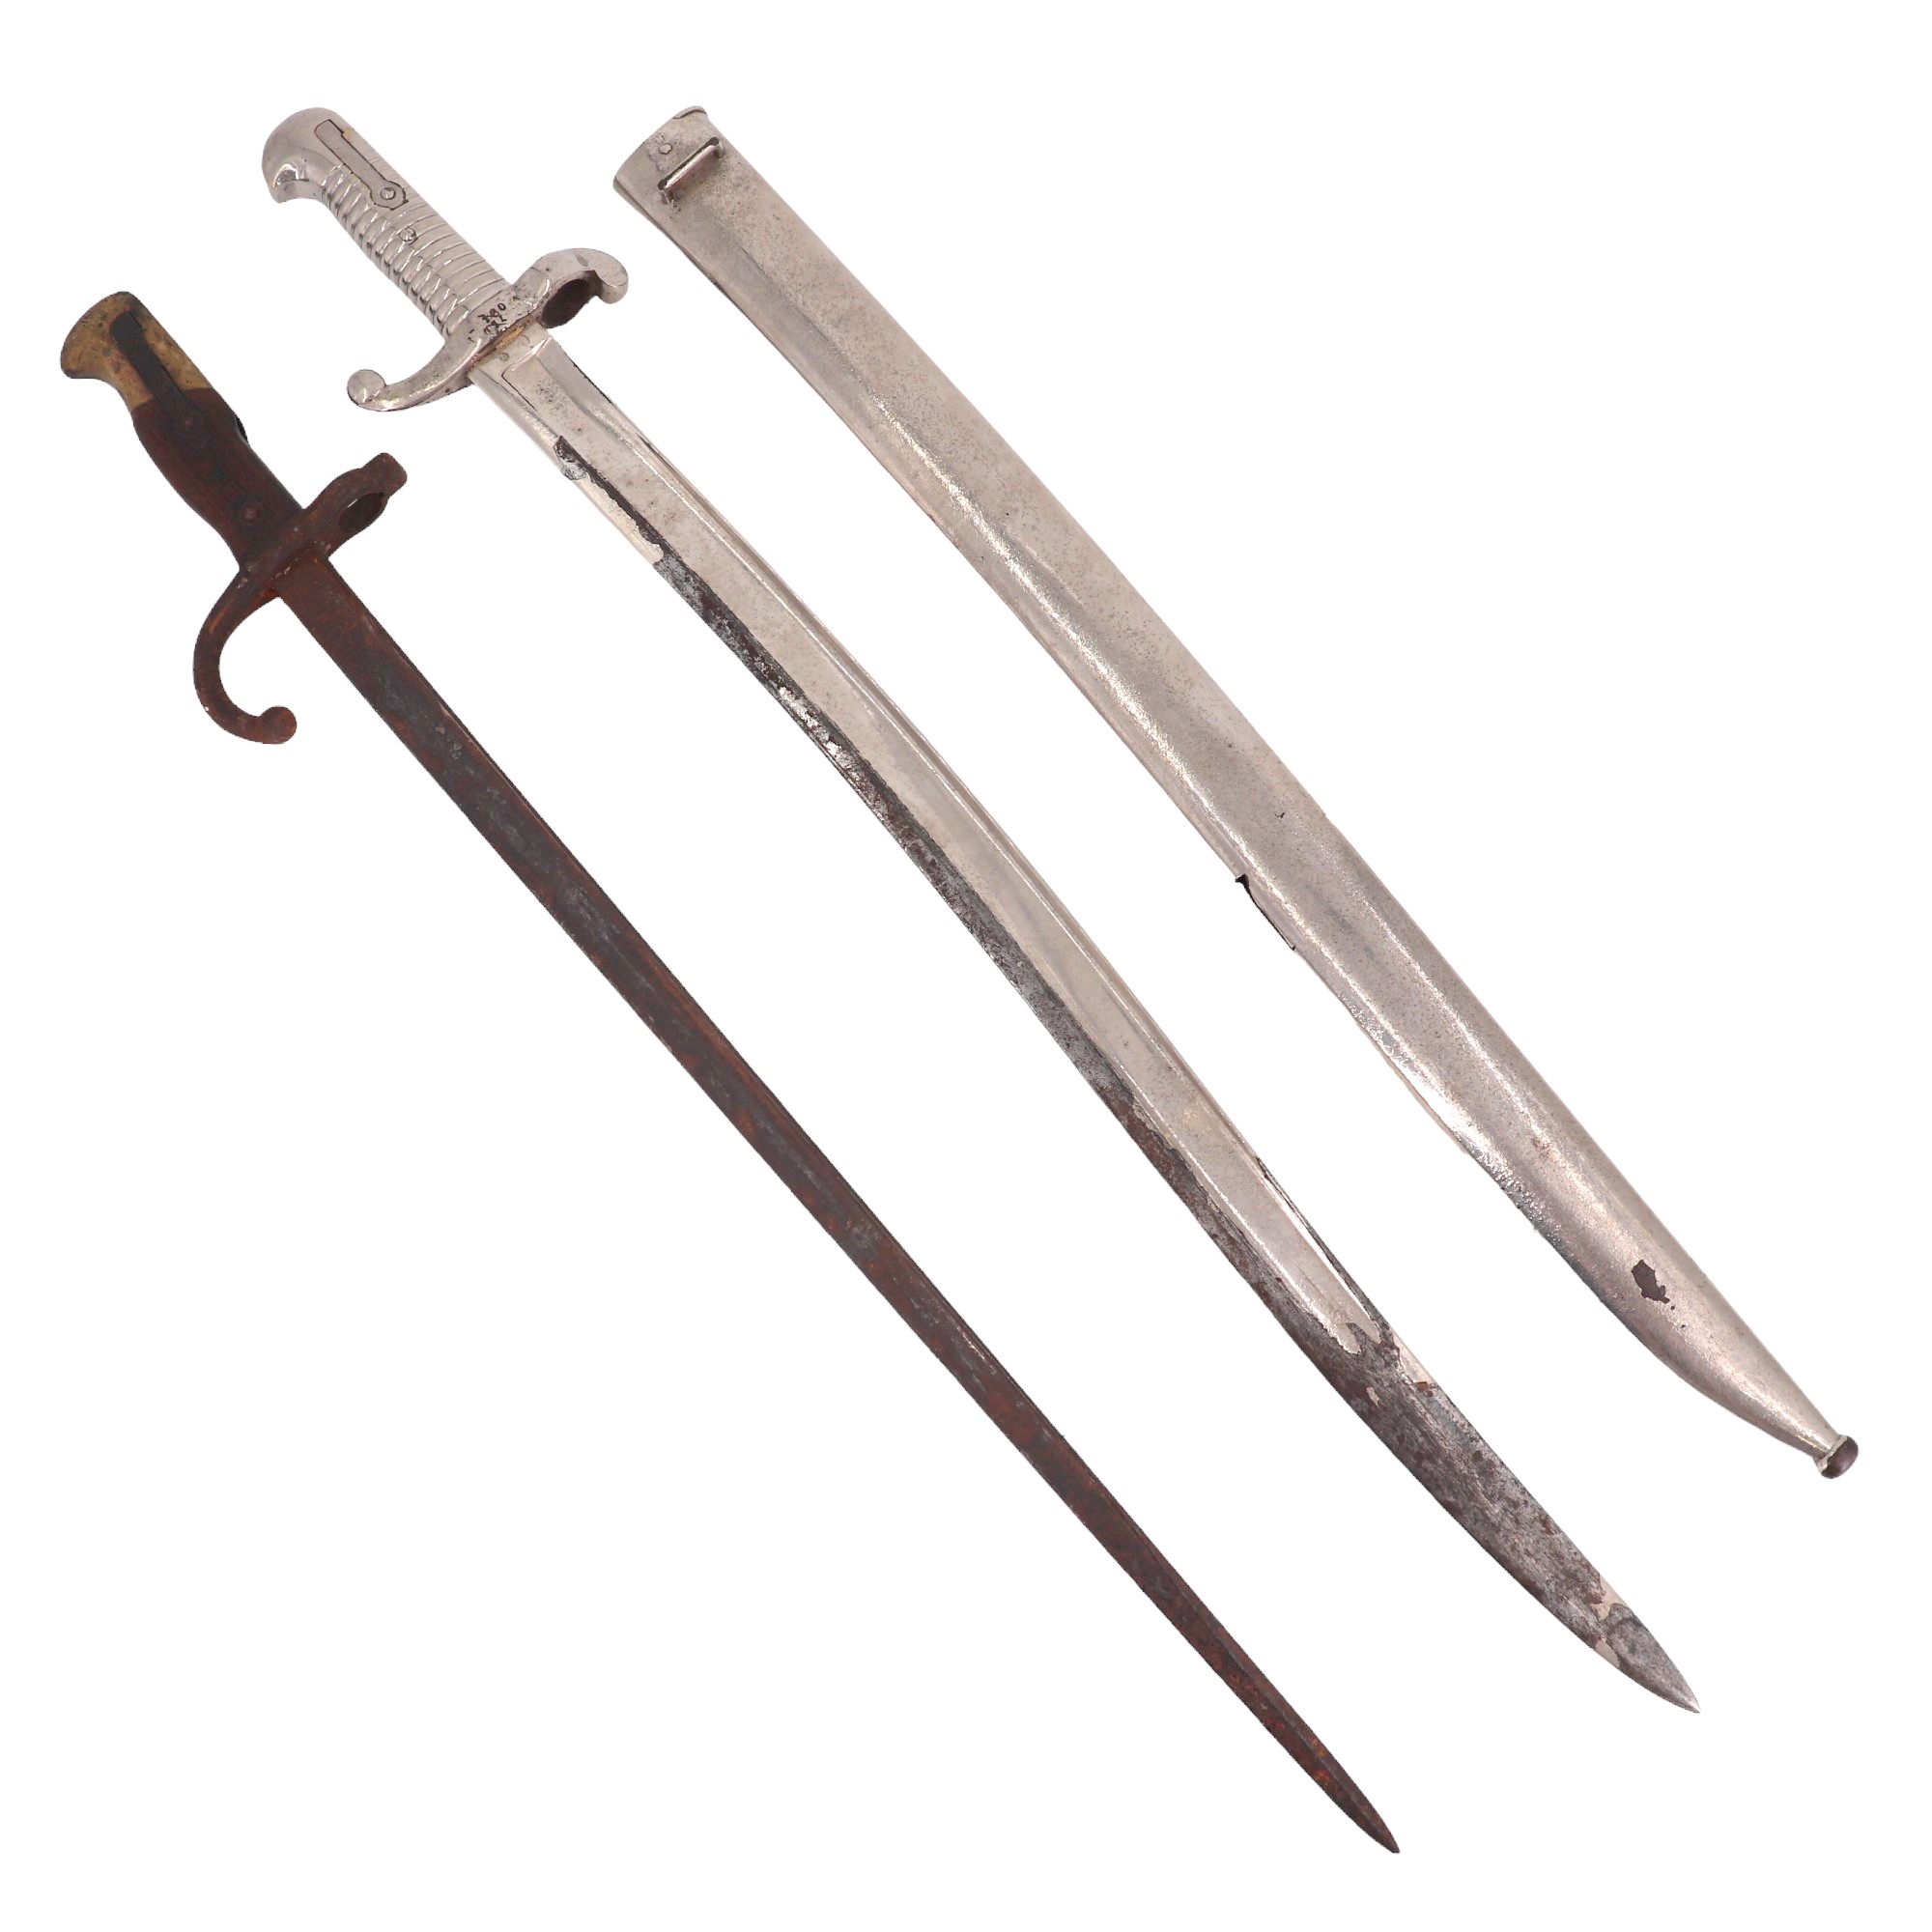 A French Mle 1842 bayonet, nickel plated and modified for cruciform wall display, together with an